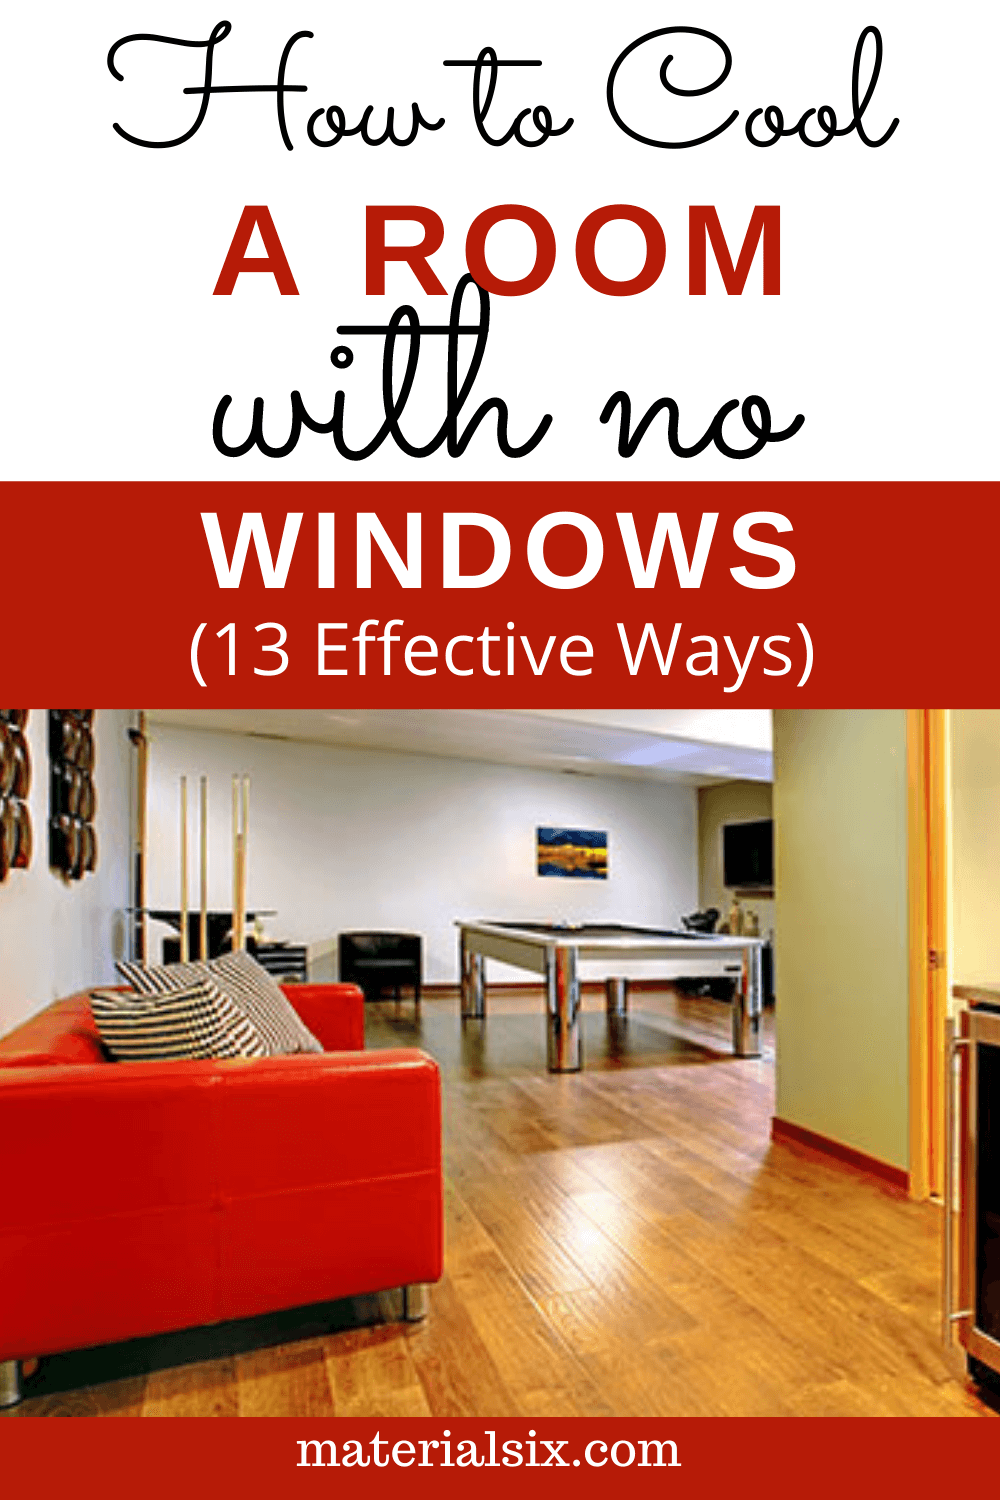 how to cool a room with no windows